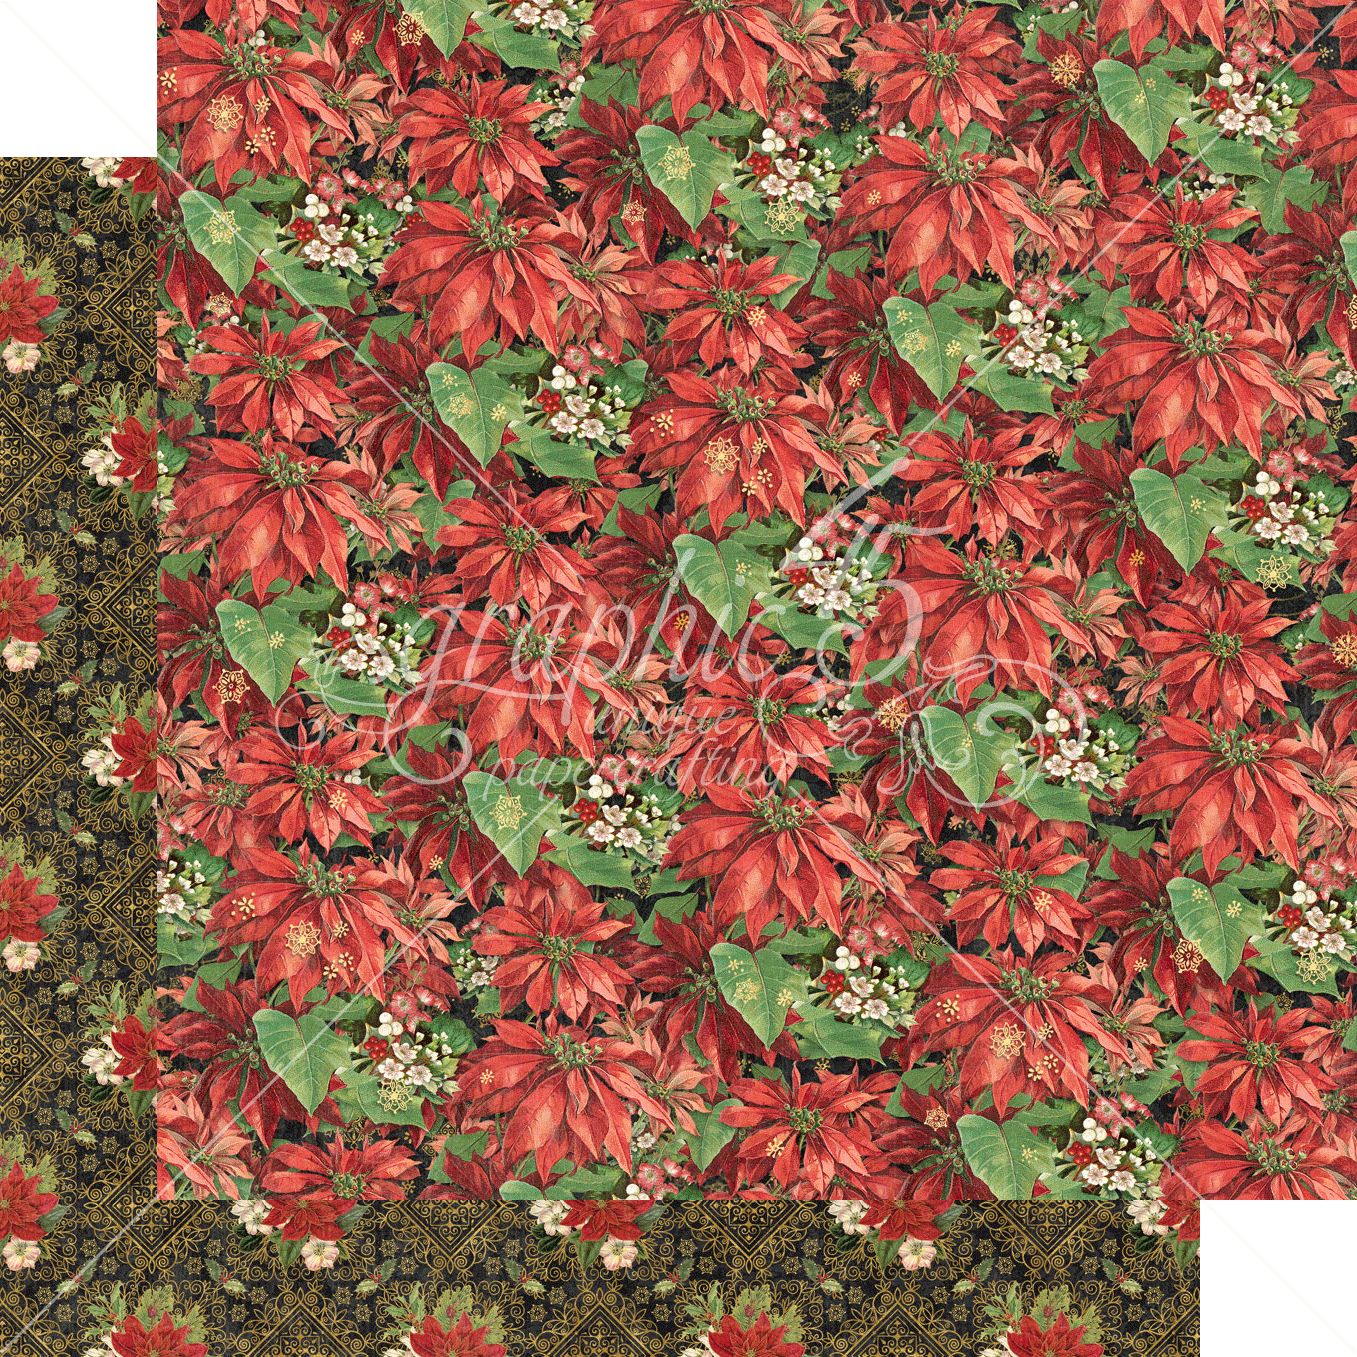 Warm Wishes Collection Yuletide Floral 12 x 12 Double-Sided Scrapbook Paper by Graphic 45 - Scrapbook Supply Companies